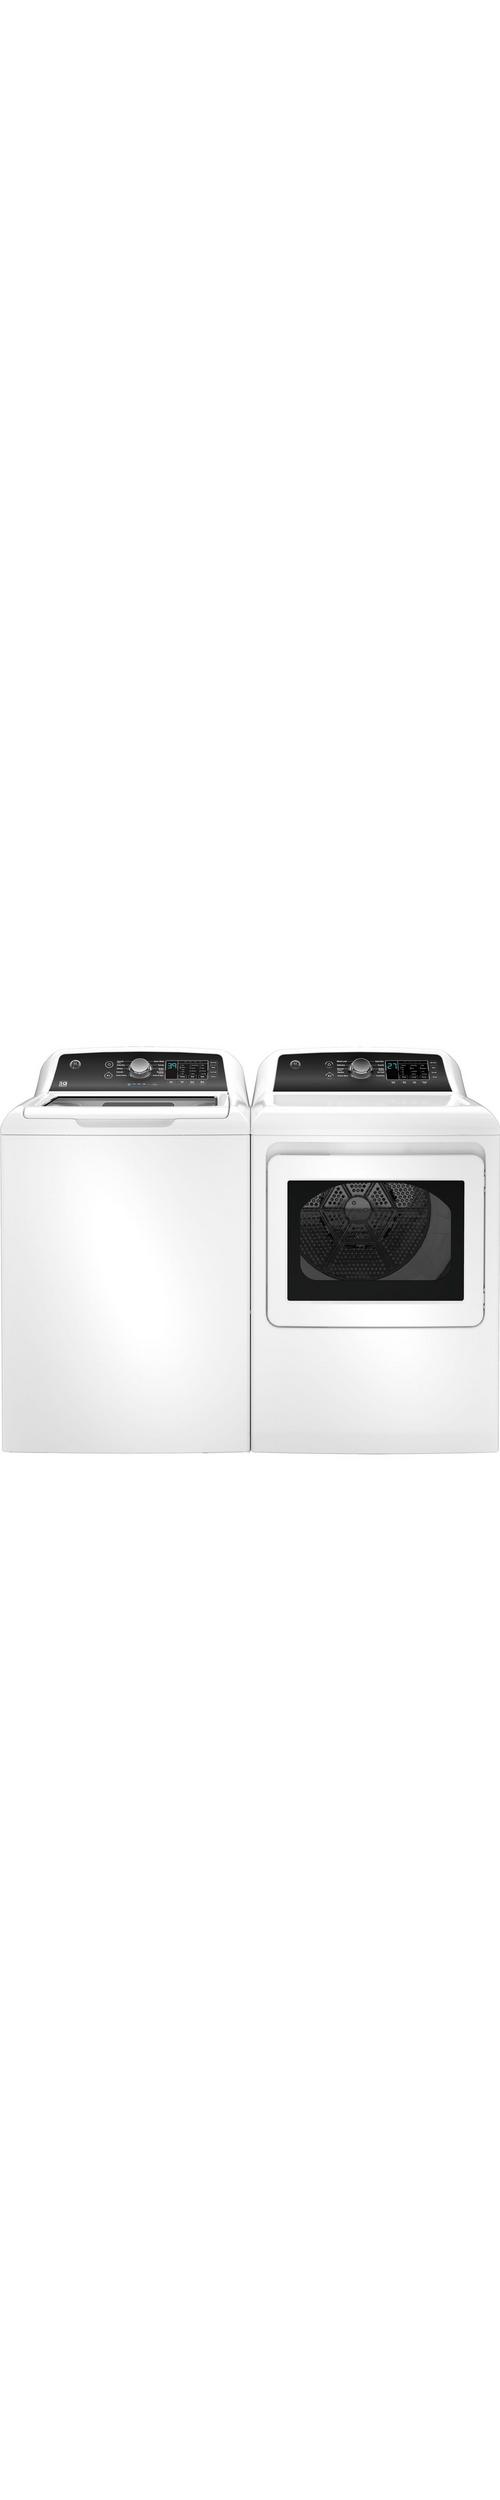 Rent to Own GE Appliances 4.5 cu. ft. GE Top Load Electric Washer & 7.4 cu.  ft. Steam Gas Dryer Laundry Set - White at Aaron's today!